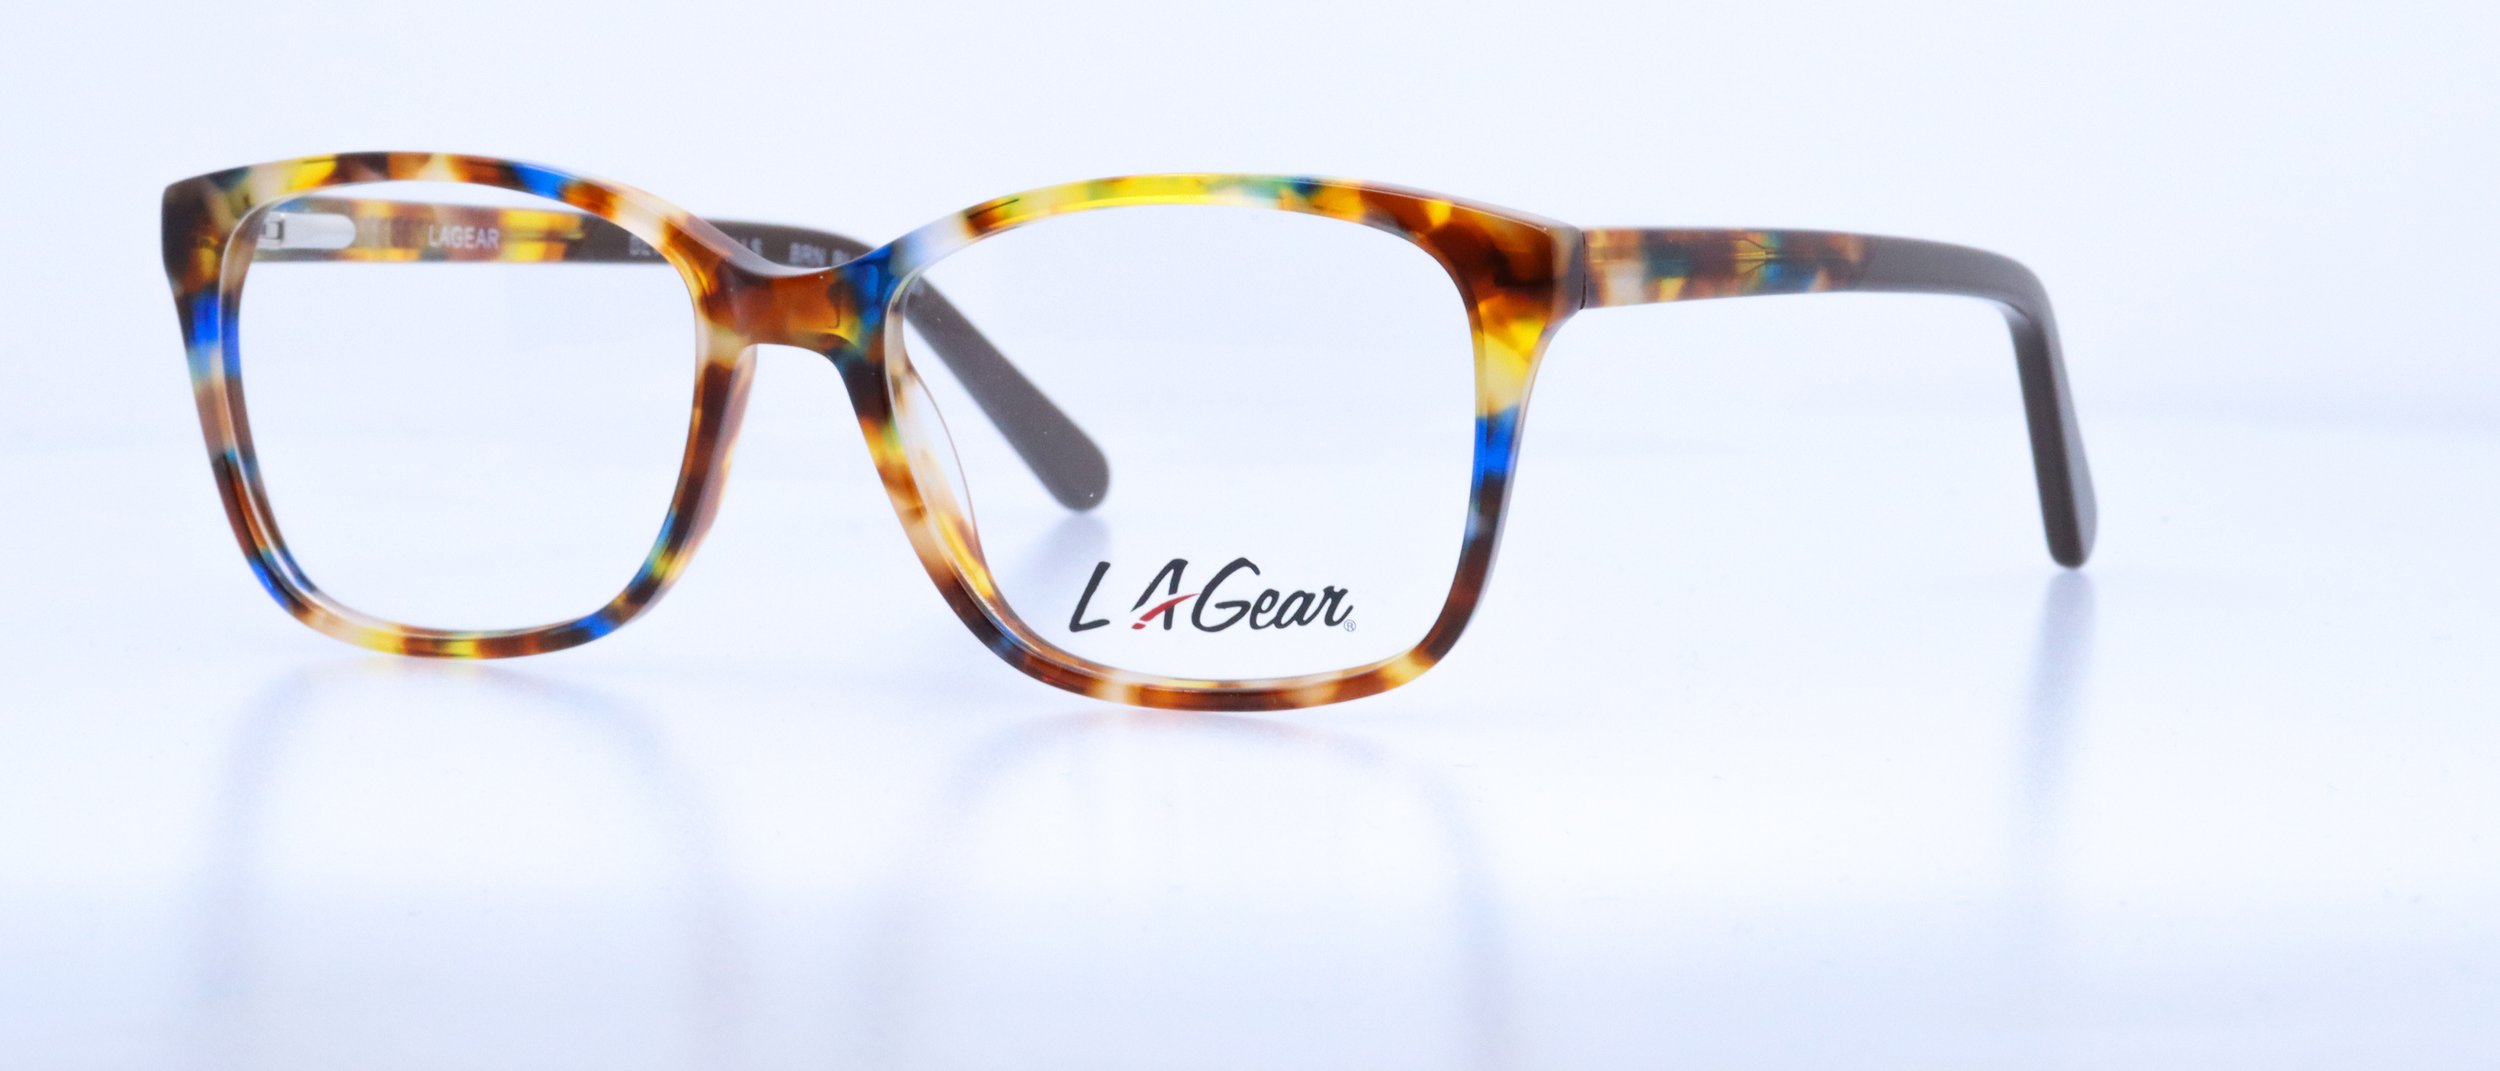  Beverly Hills: 53-17-135, Available in Brown/Blue Demi or Plum/Tortoise 